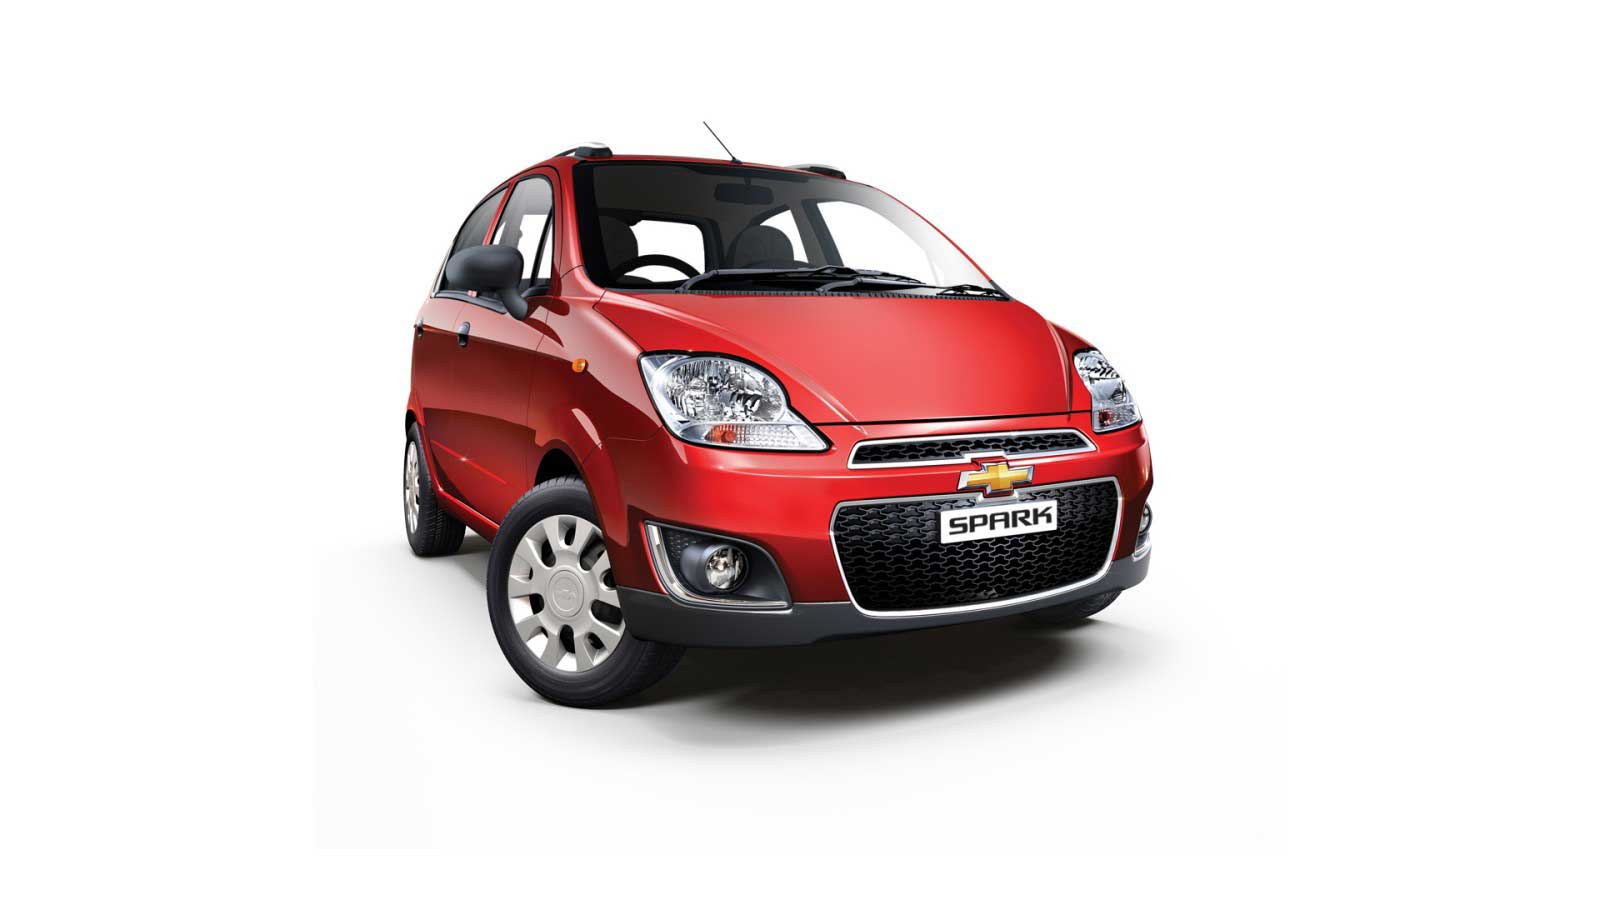 Chevrolet Spark LS 1.0 BS-IV OBDII Exterior front cross view